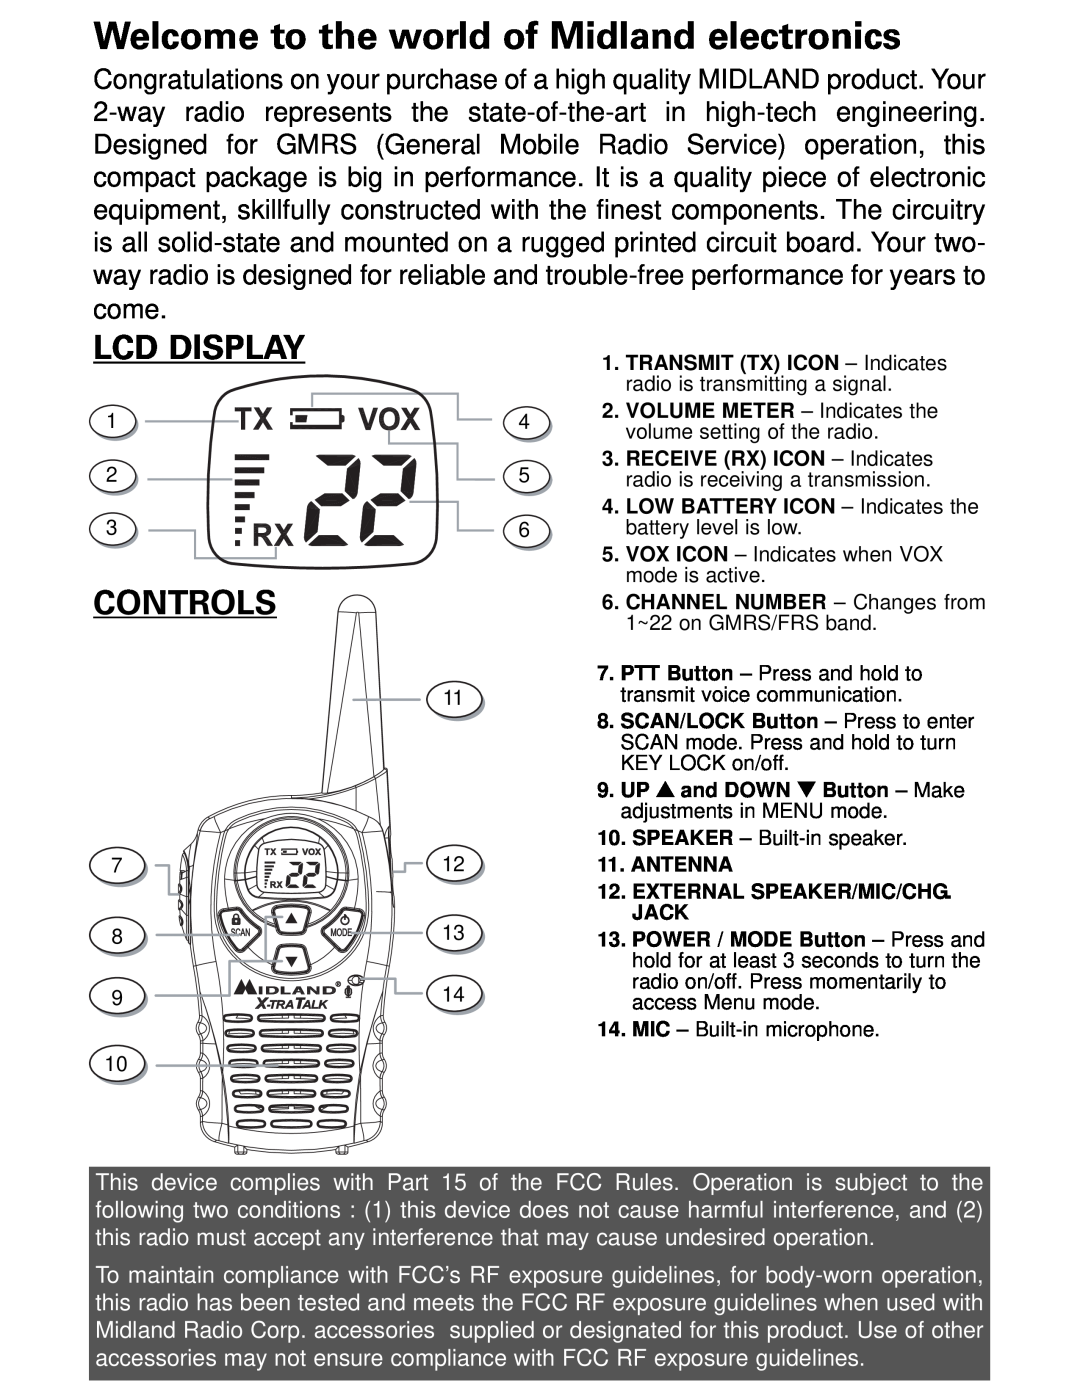 Midland Radio LXT112 Series owner manual Lcd Display, Controls, Welcome to the world of Midland electronics 